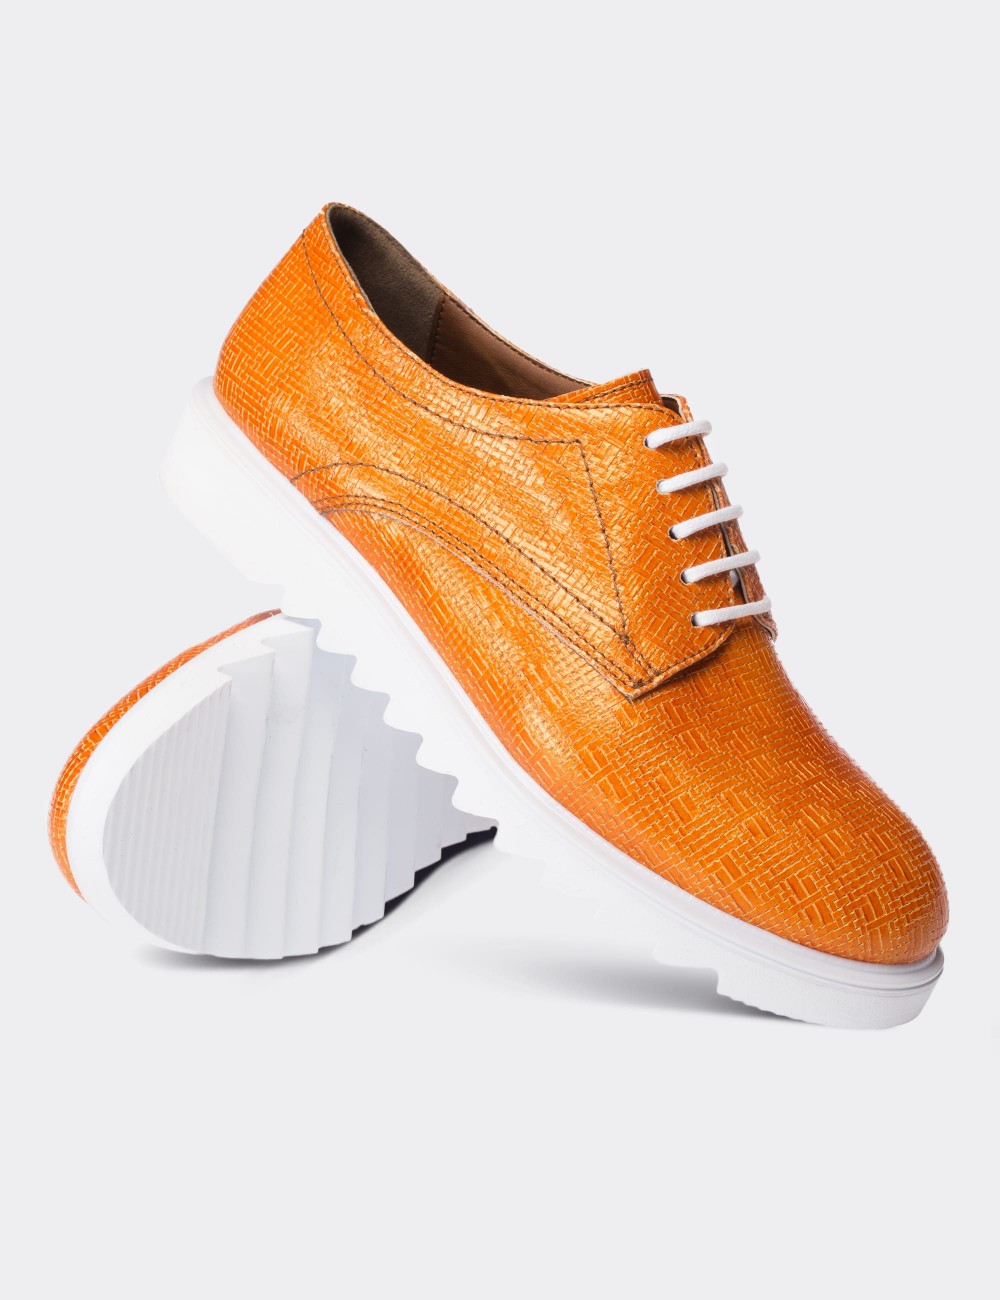 Orange  Leather Lace-up Shoes - 01430ZTRCP02